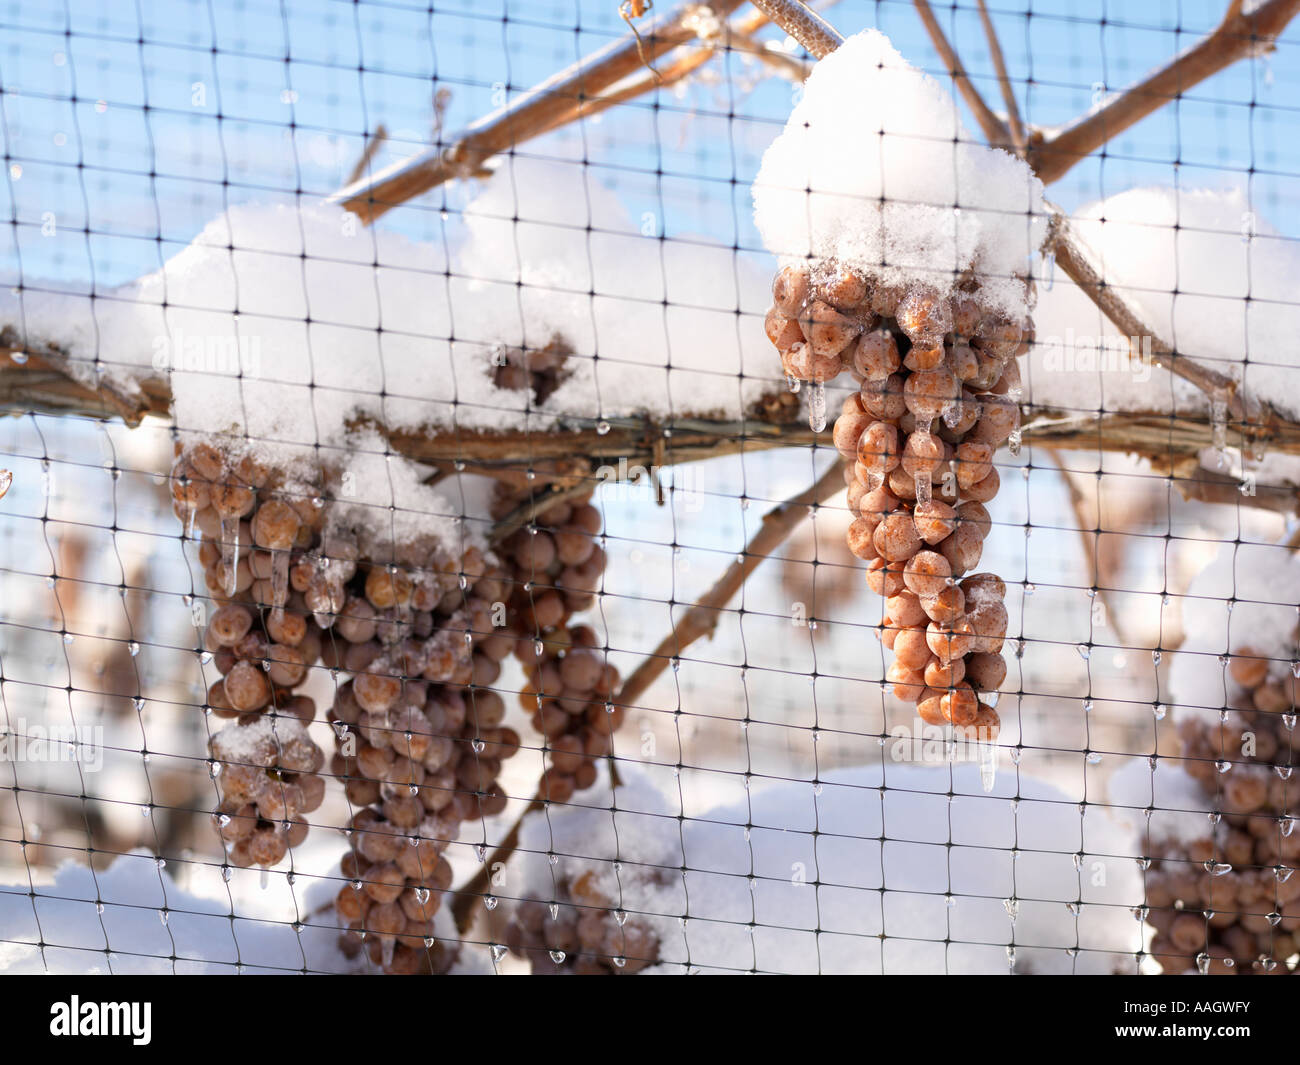 Canada Ontario Niagara on the Lake icewine grapes left on the vine for a winter harvest to produce ice wine Stock Photo